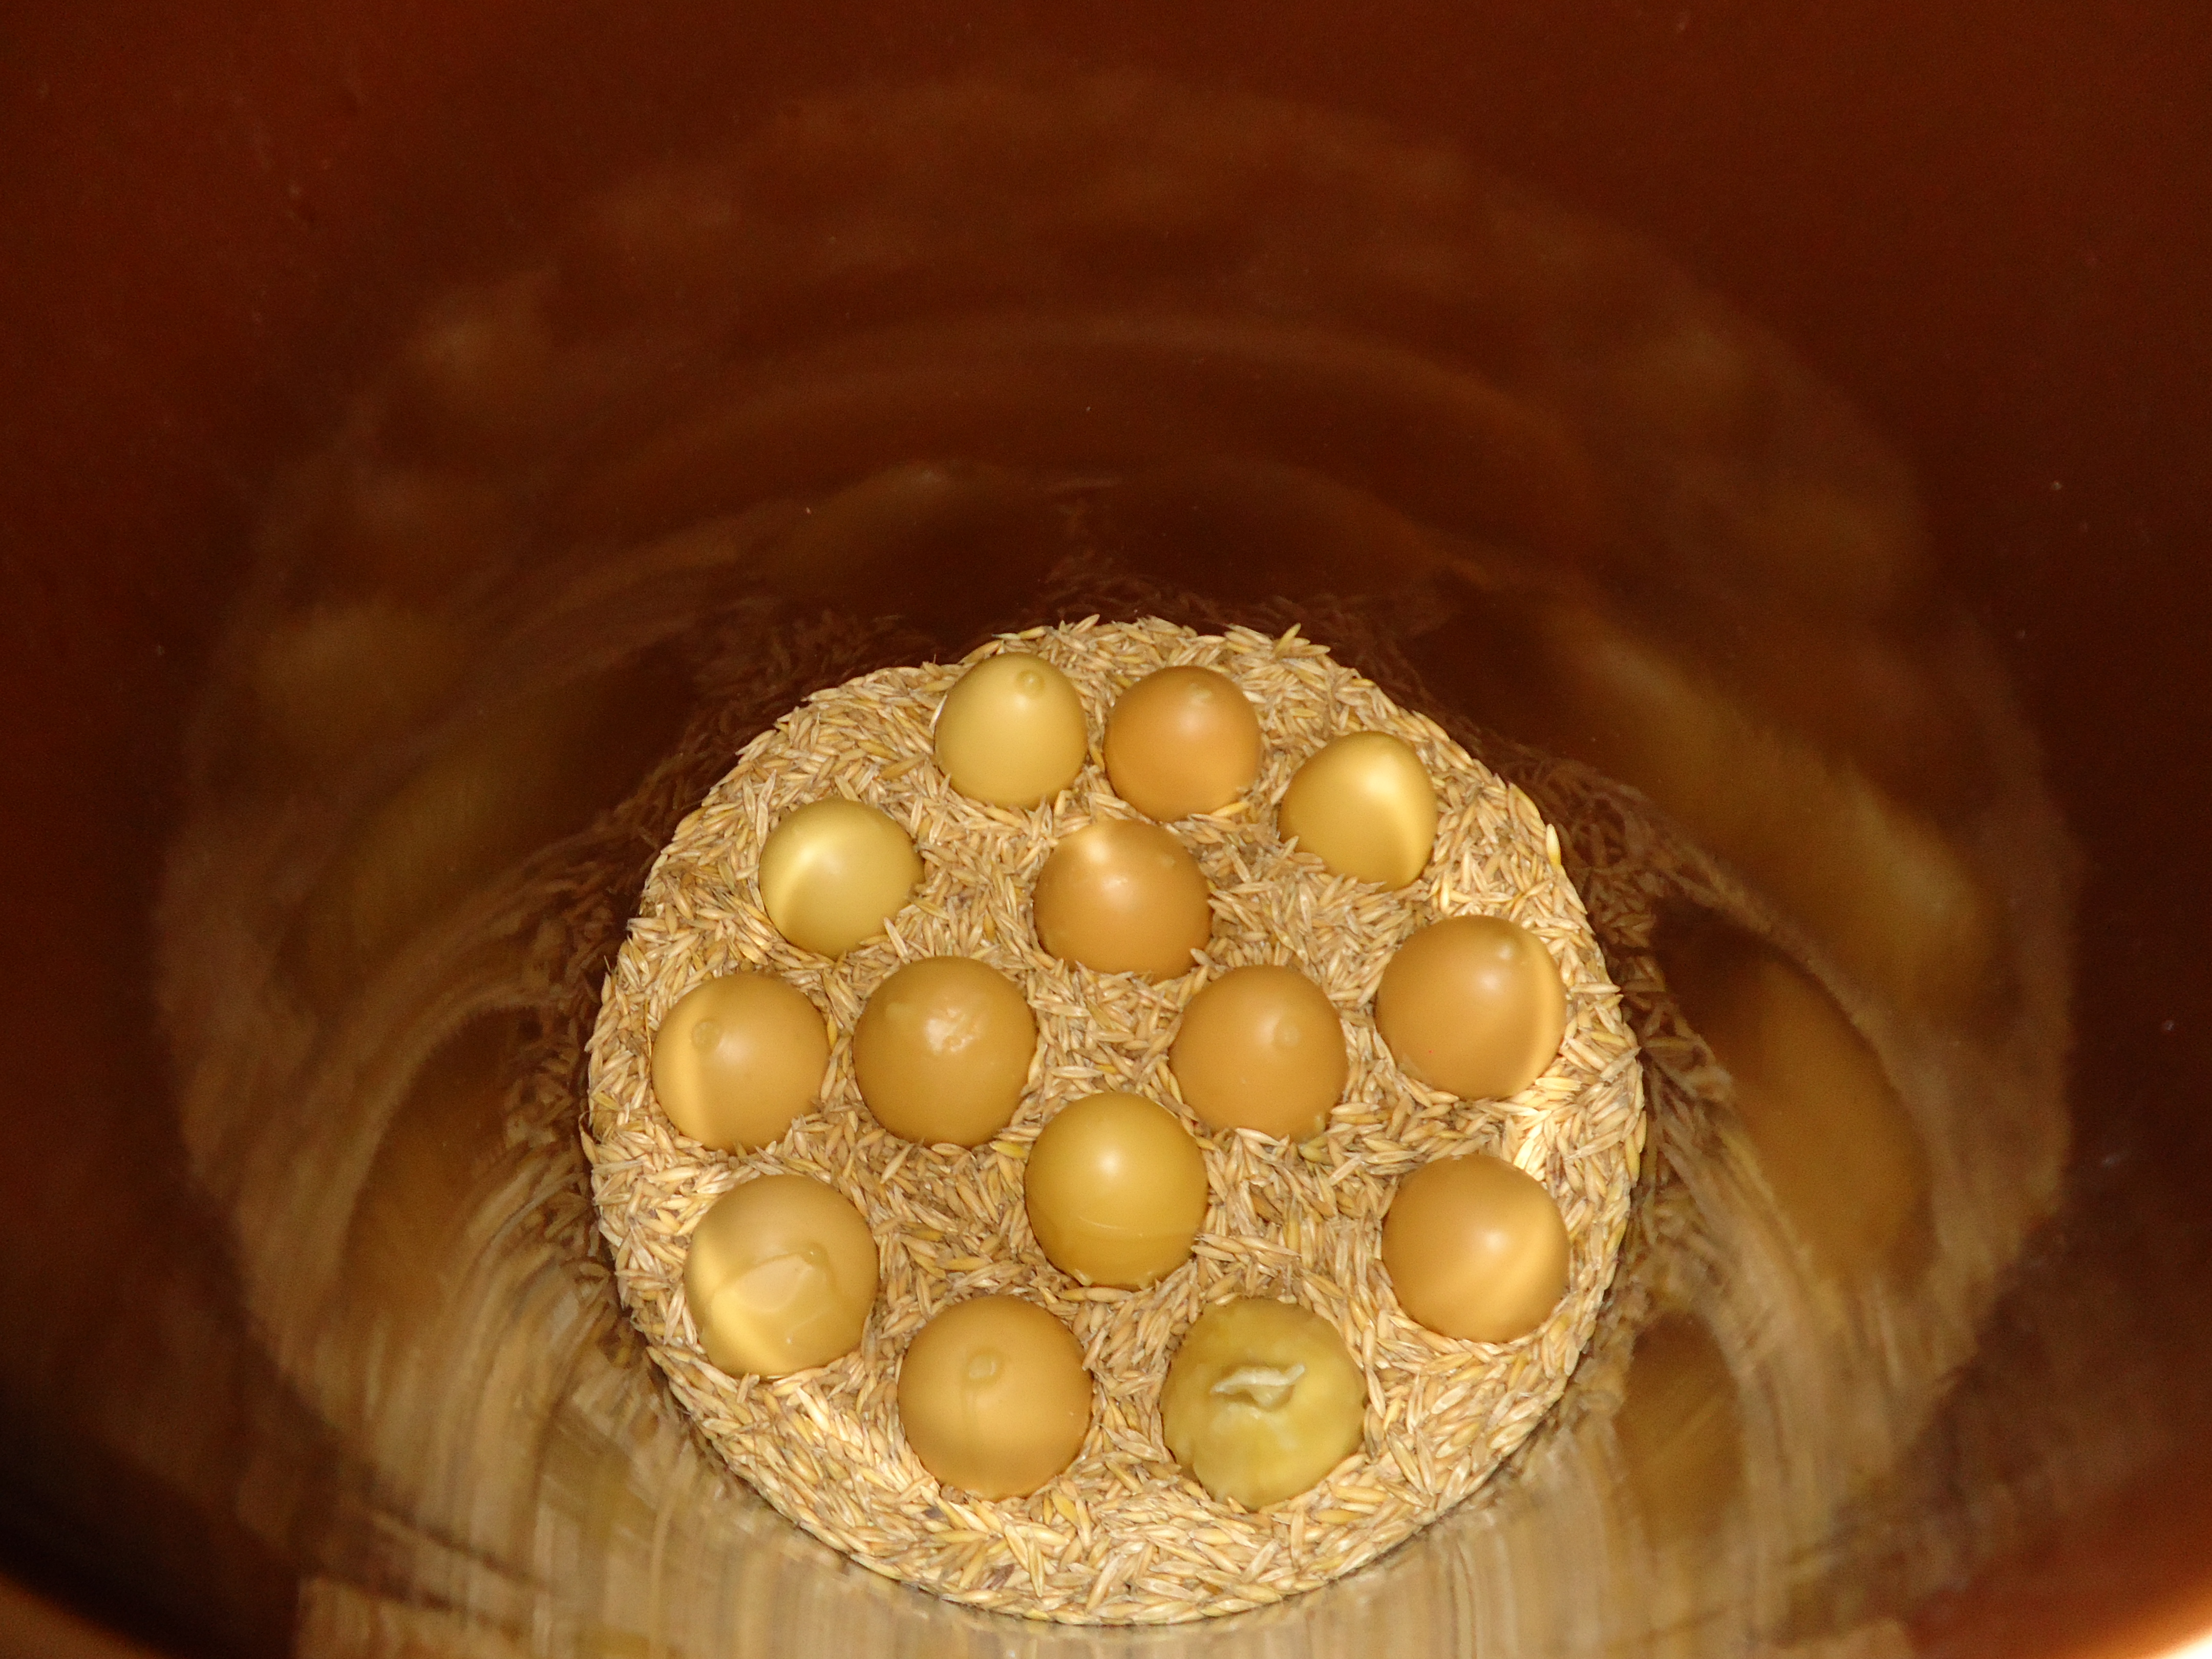 Storing and Preserving Chicken Eggs